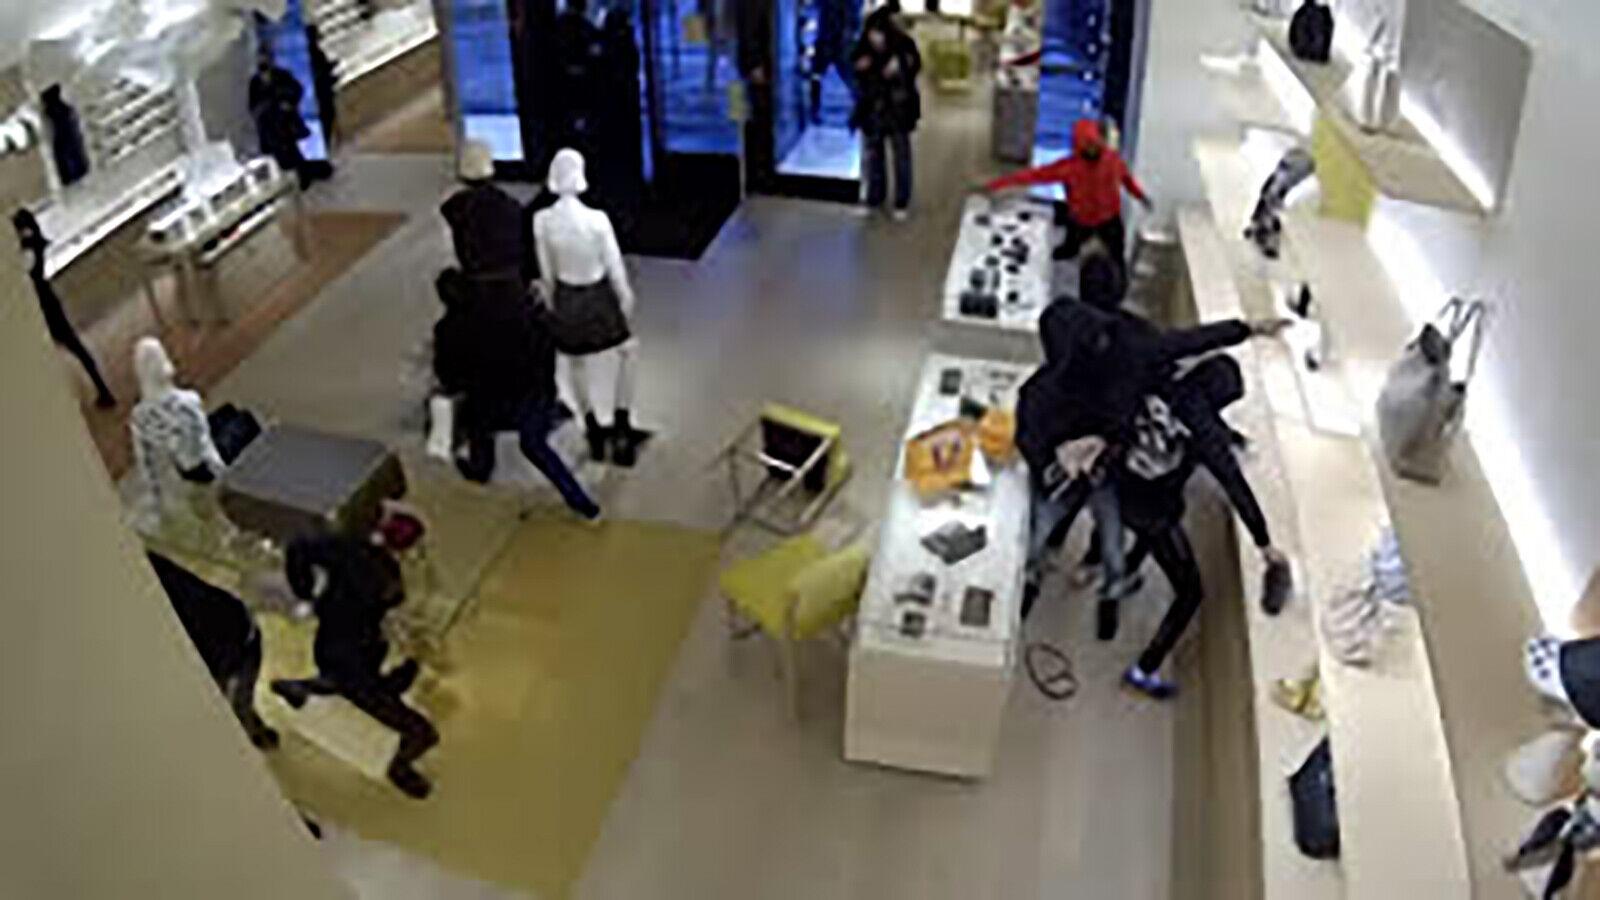 14 people rushed into a Louis Vuitton store outside Chicago and